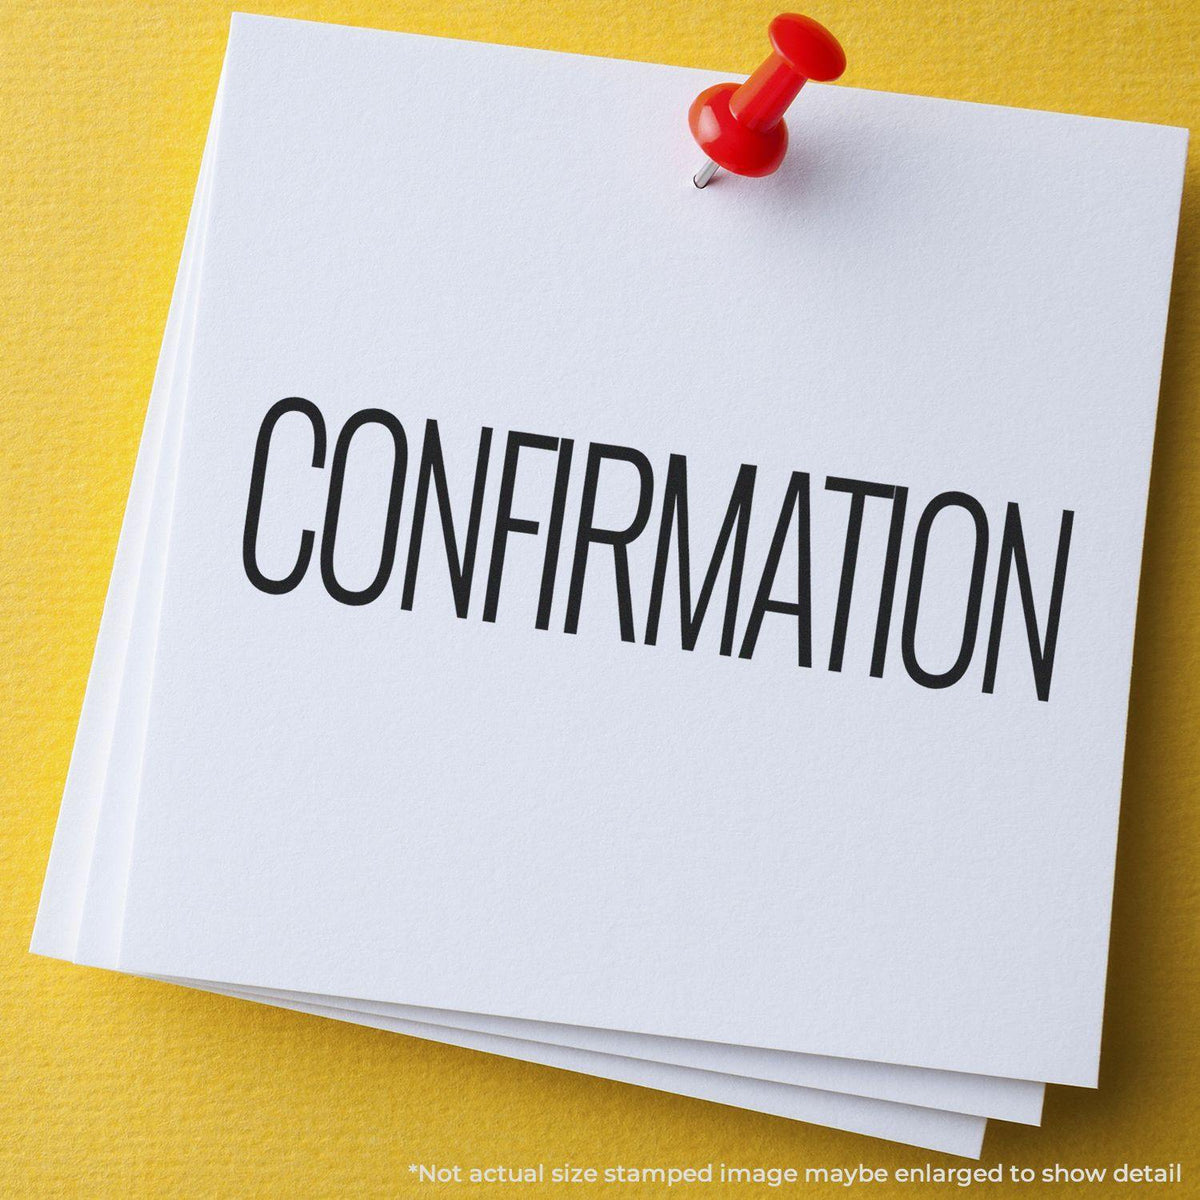 Large Confirmation Rubber Stamp In Use Photo